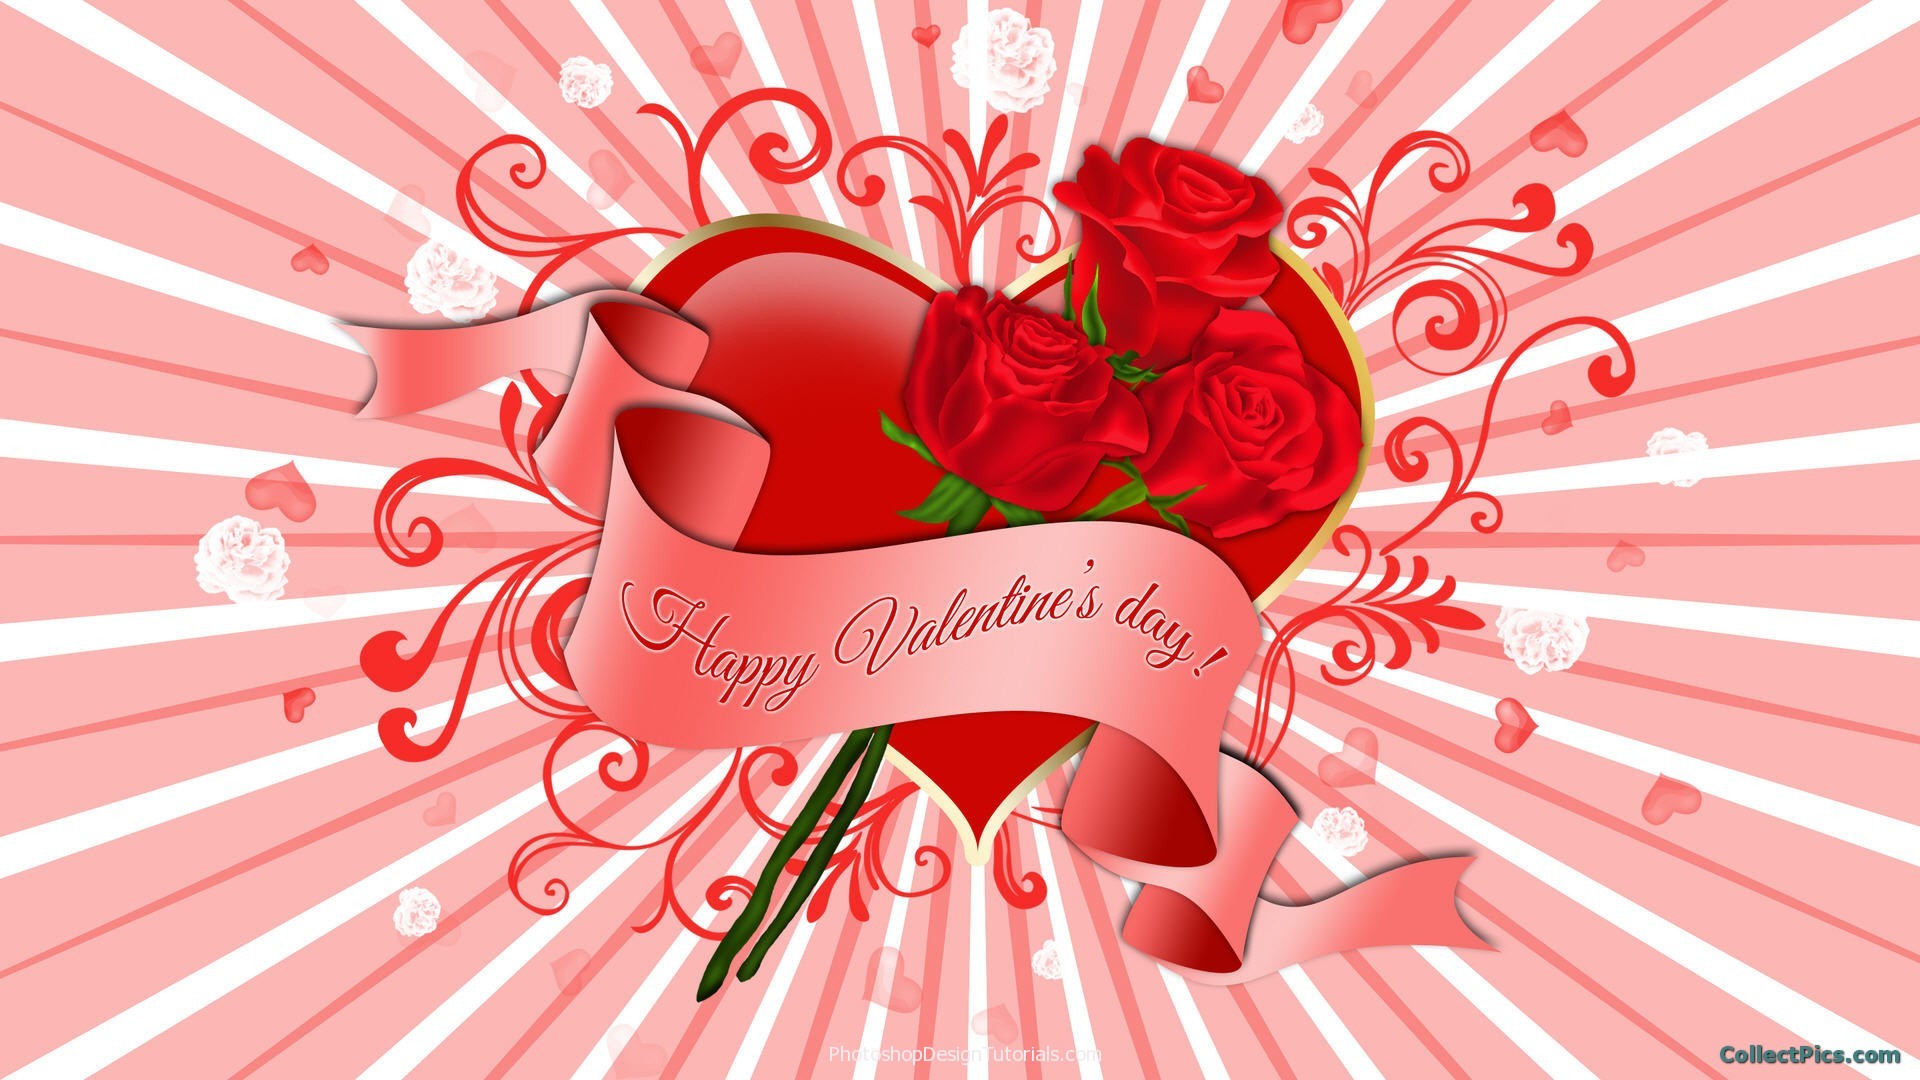 Cool Dekstop Happy Valentines Day Holiday Wallpaper With